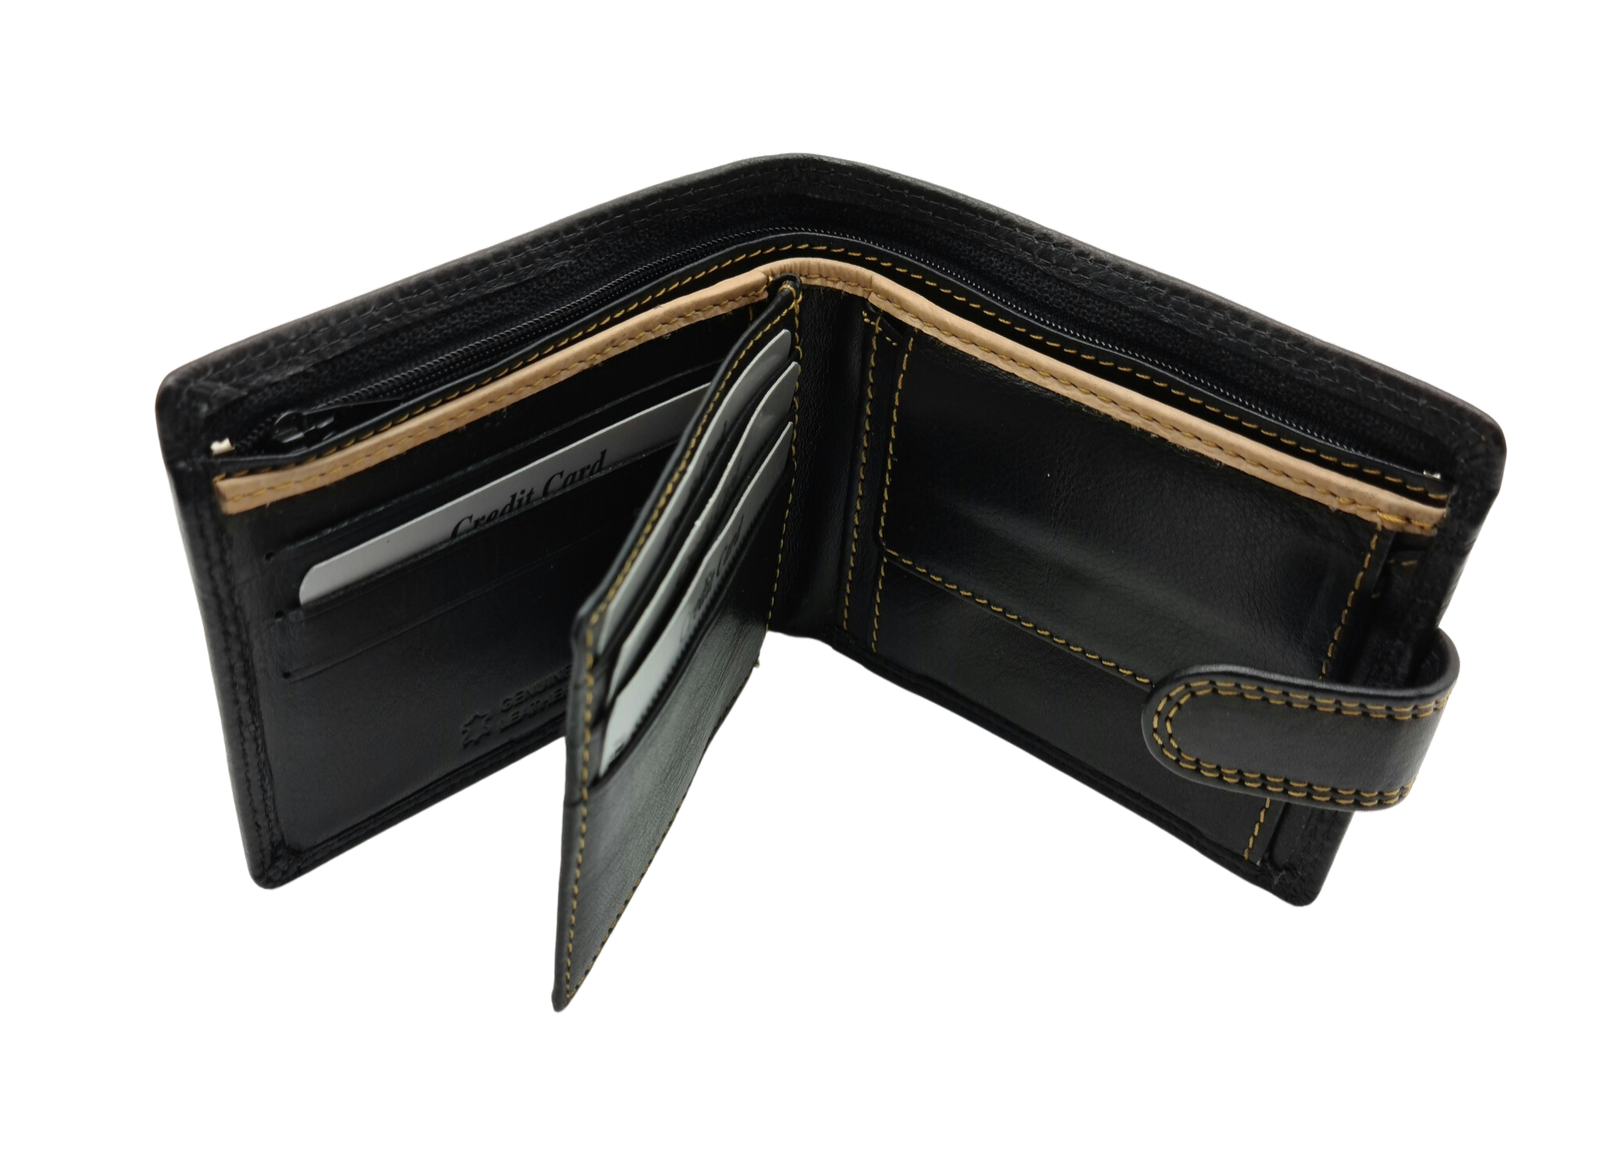 Migant Design leather wallet with RFID protection 6213 - Migant